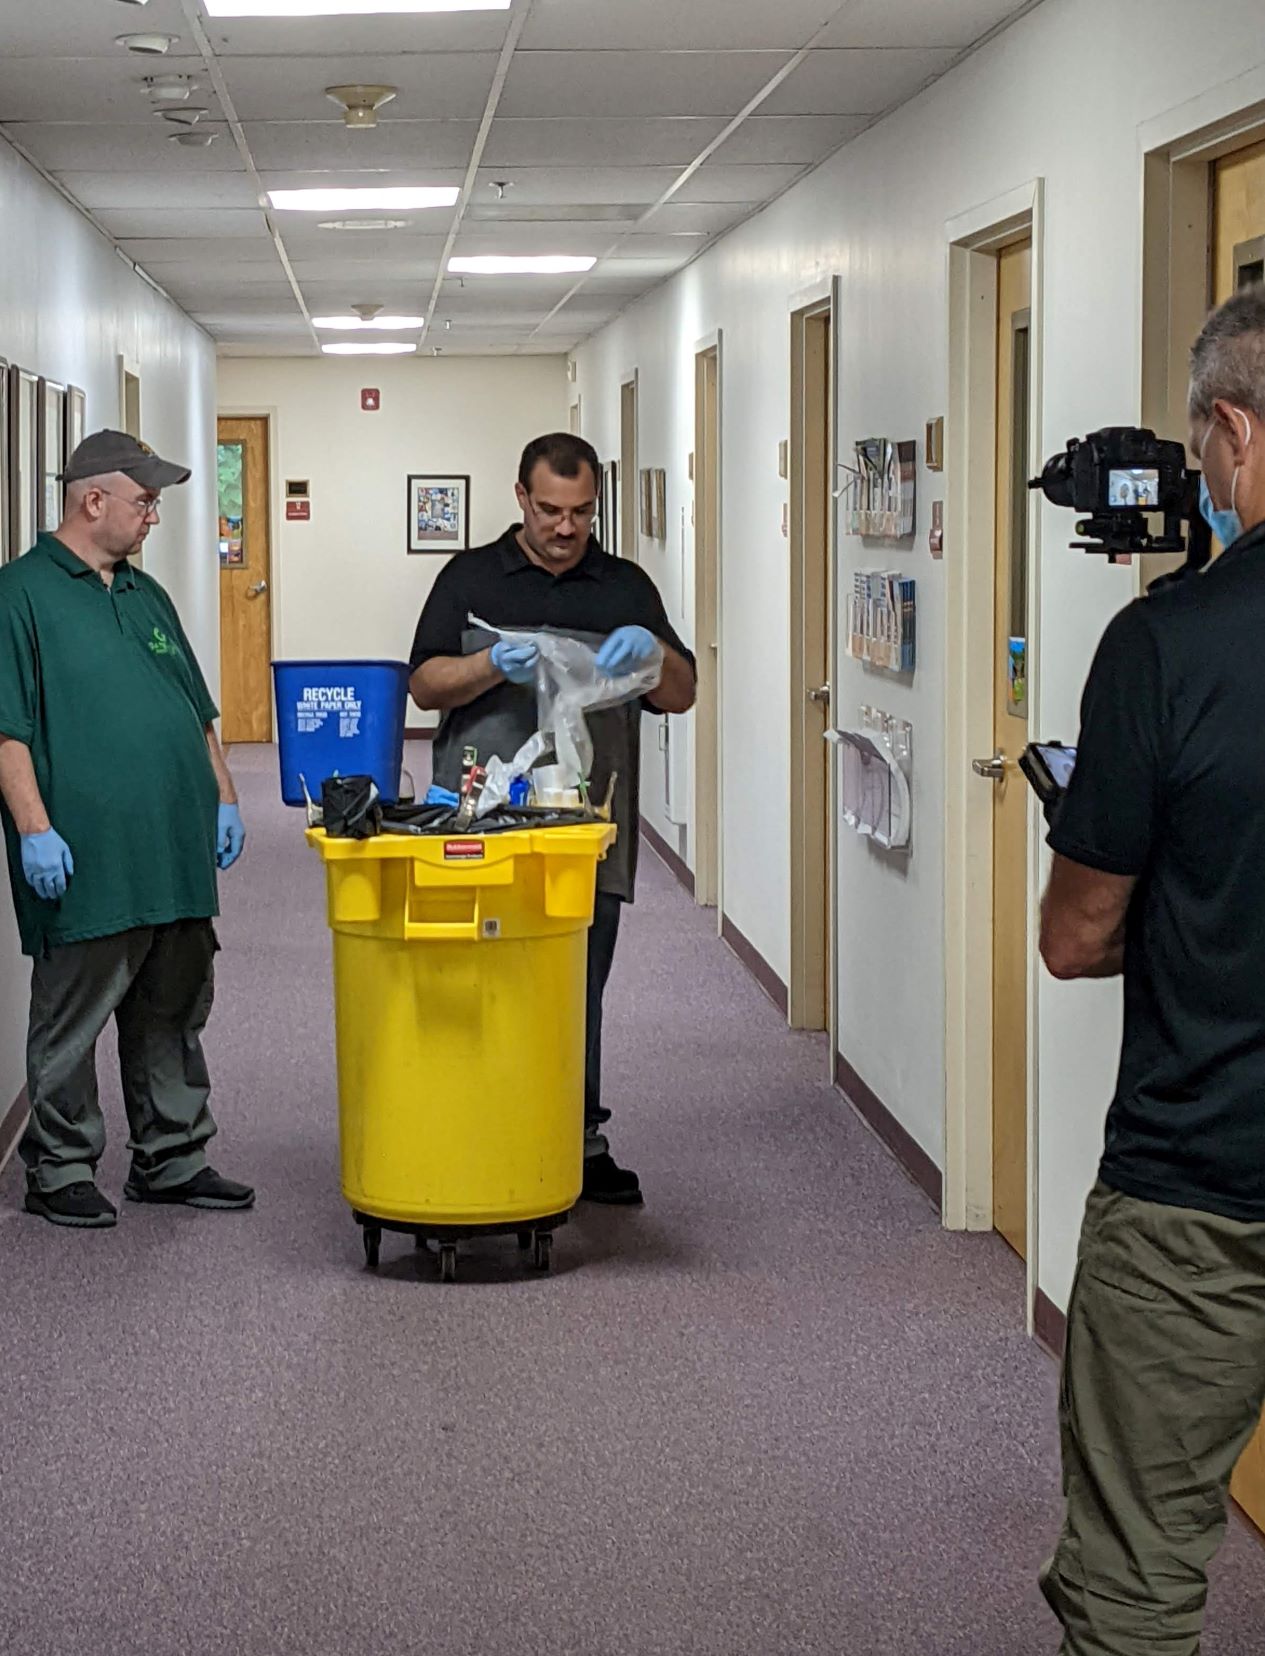 Videographer filming two janitors in an office hallway